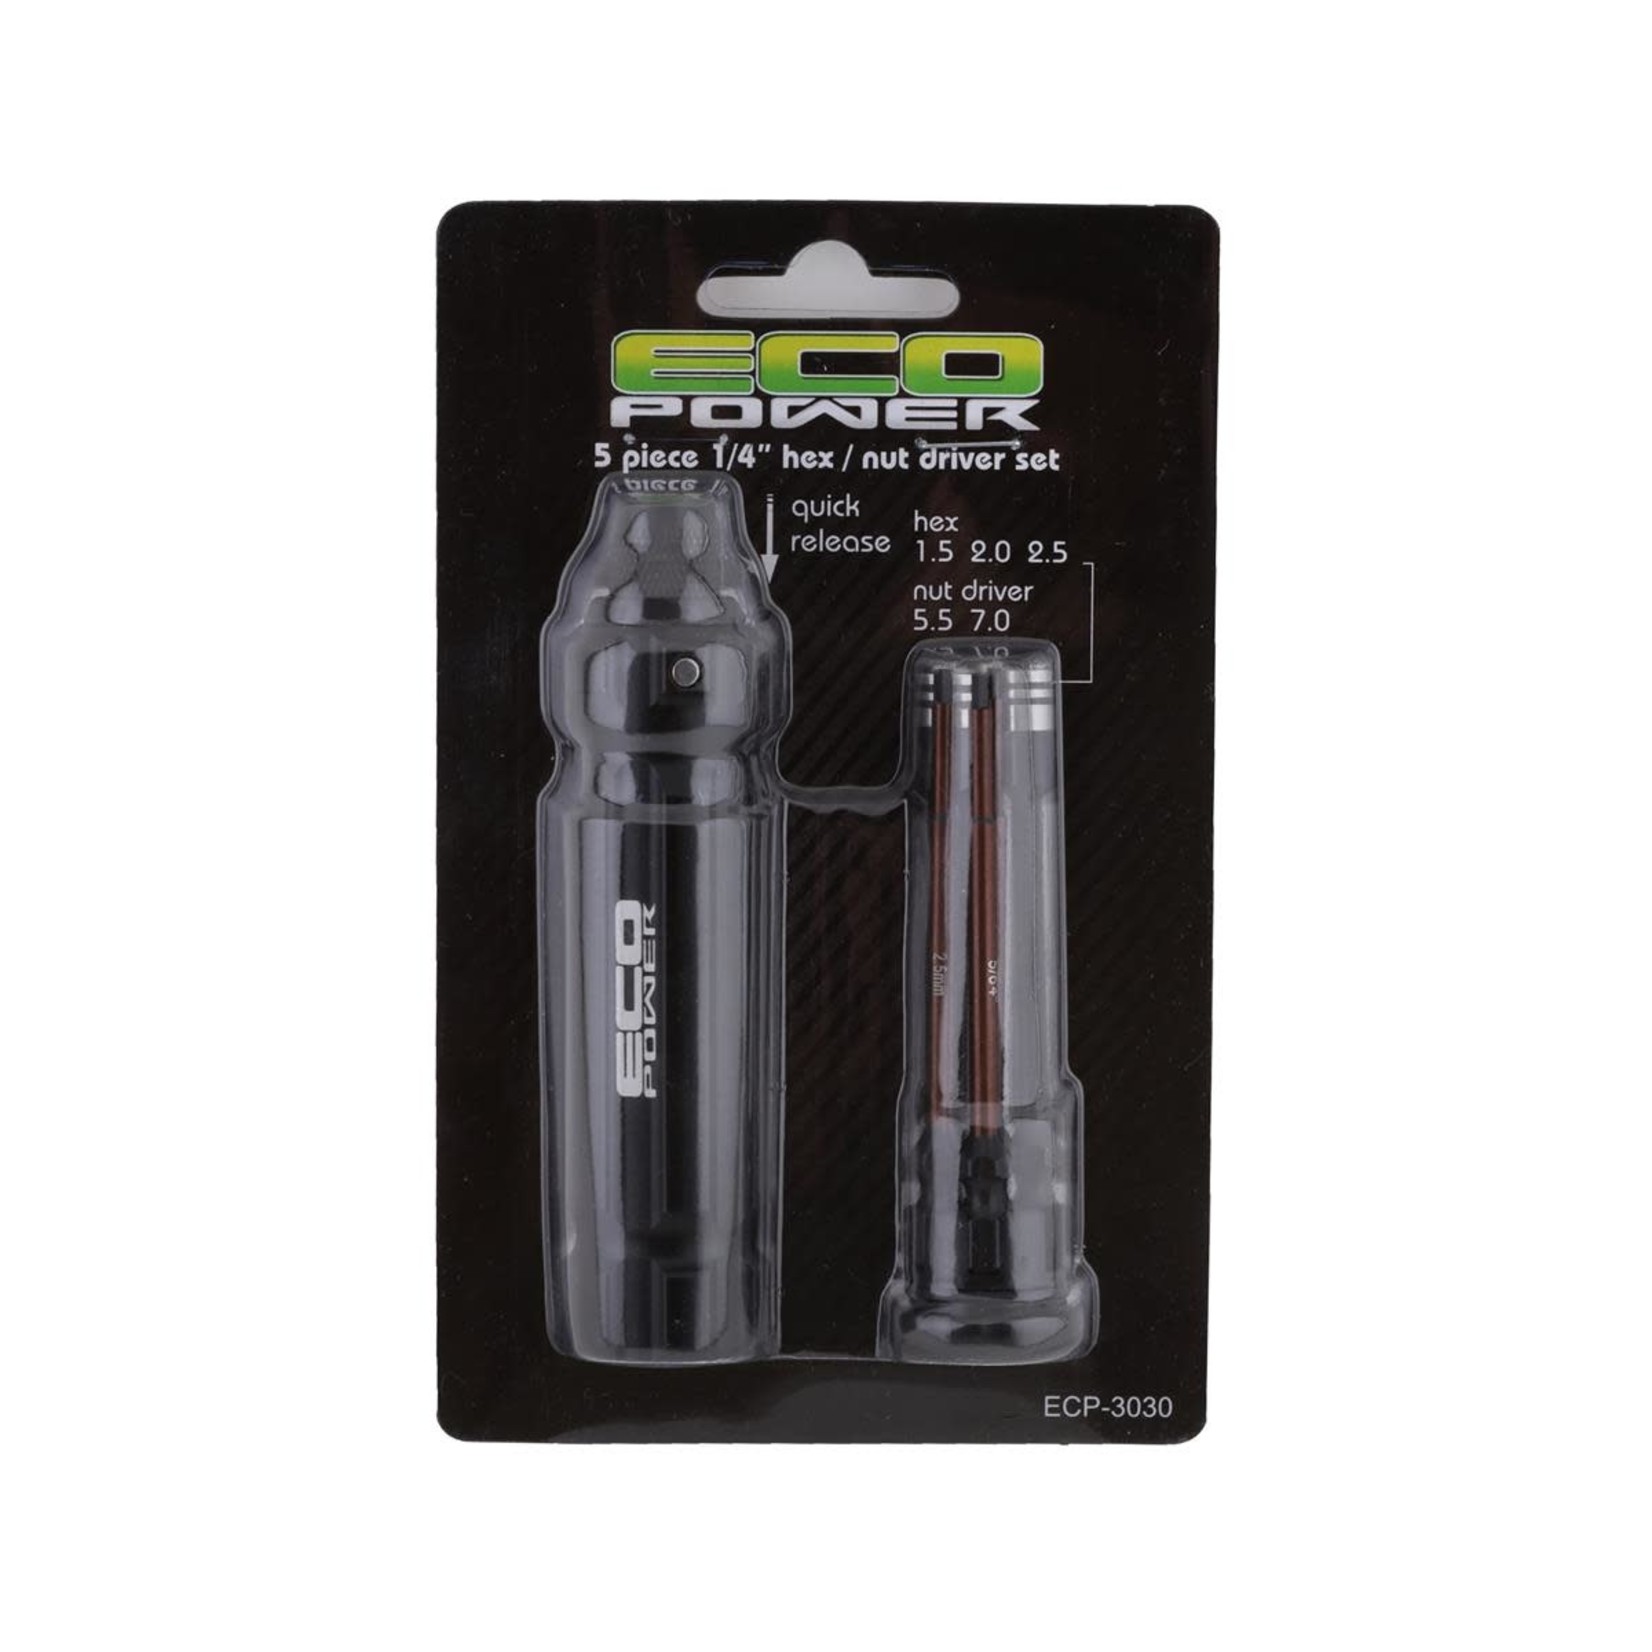 EcoPower EcoPower 5-Piece 1/4" Hex & Nut Driver Set (1.5, 2.0, 2.5mm Hex and 5.5, 7mm Nut Driver) #ECP-3030